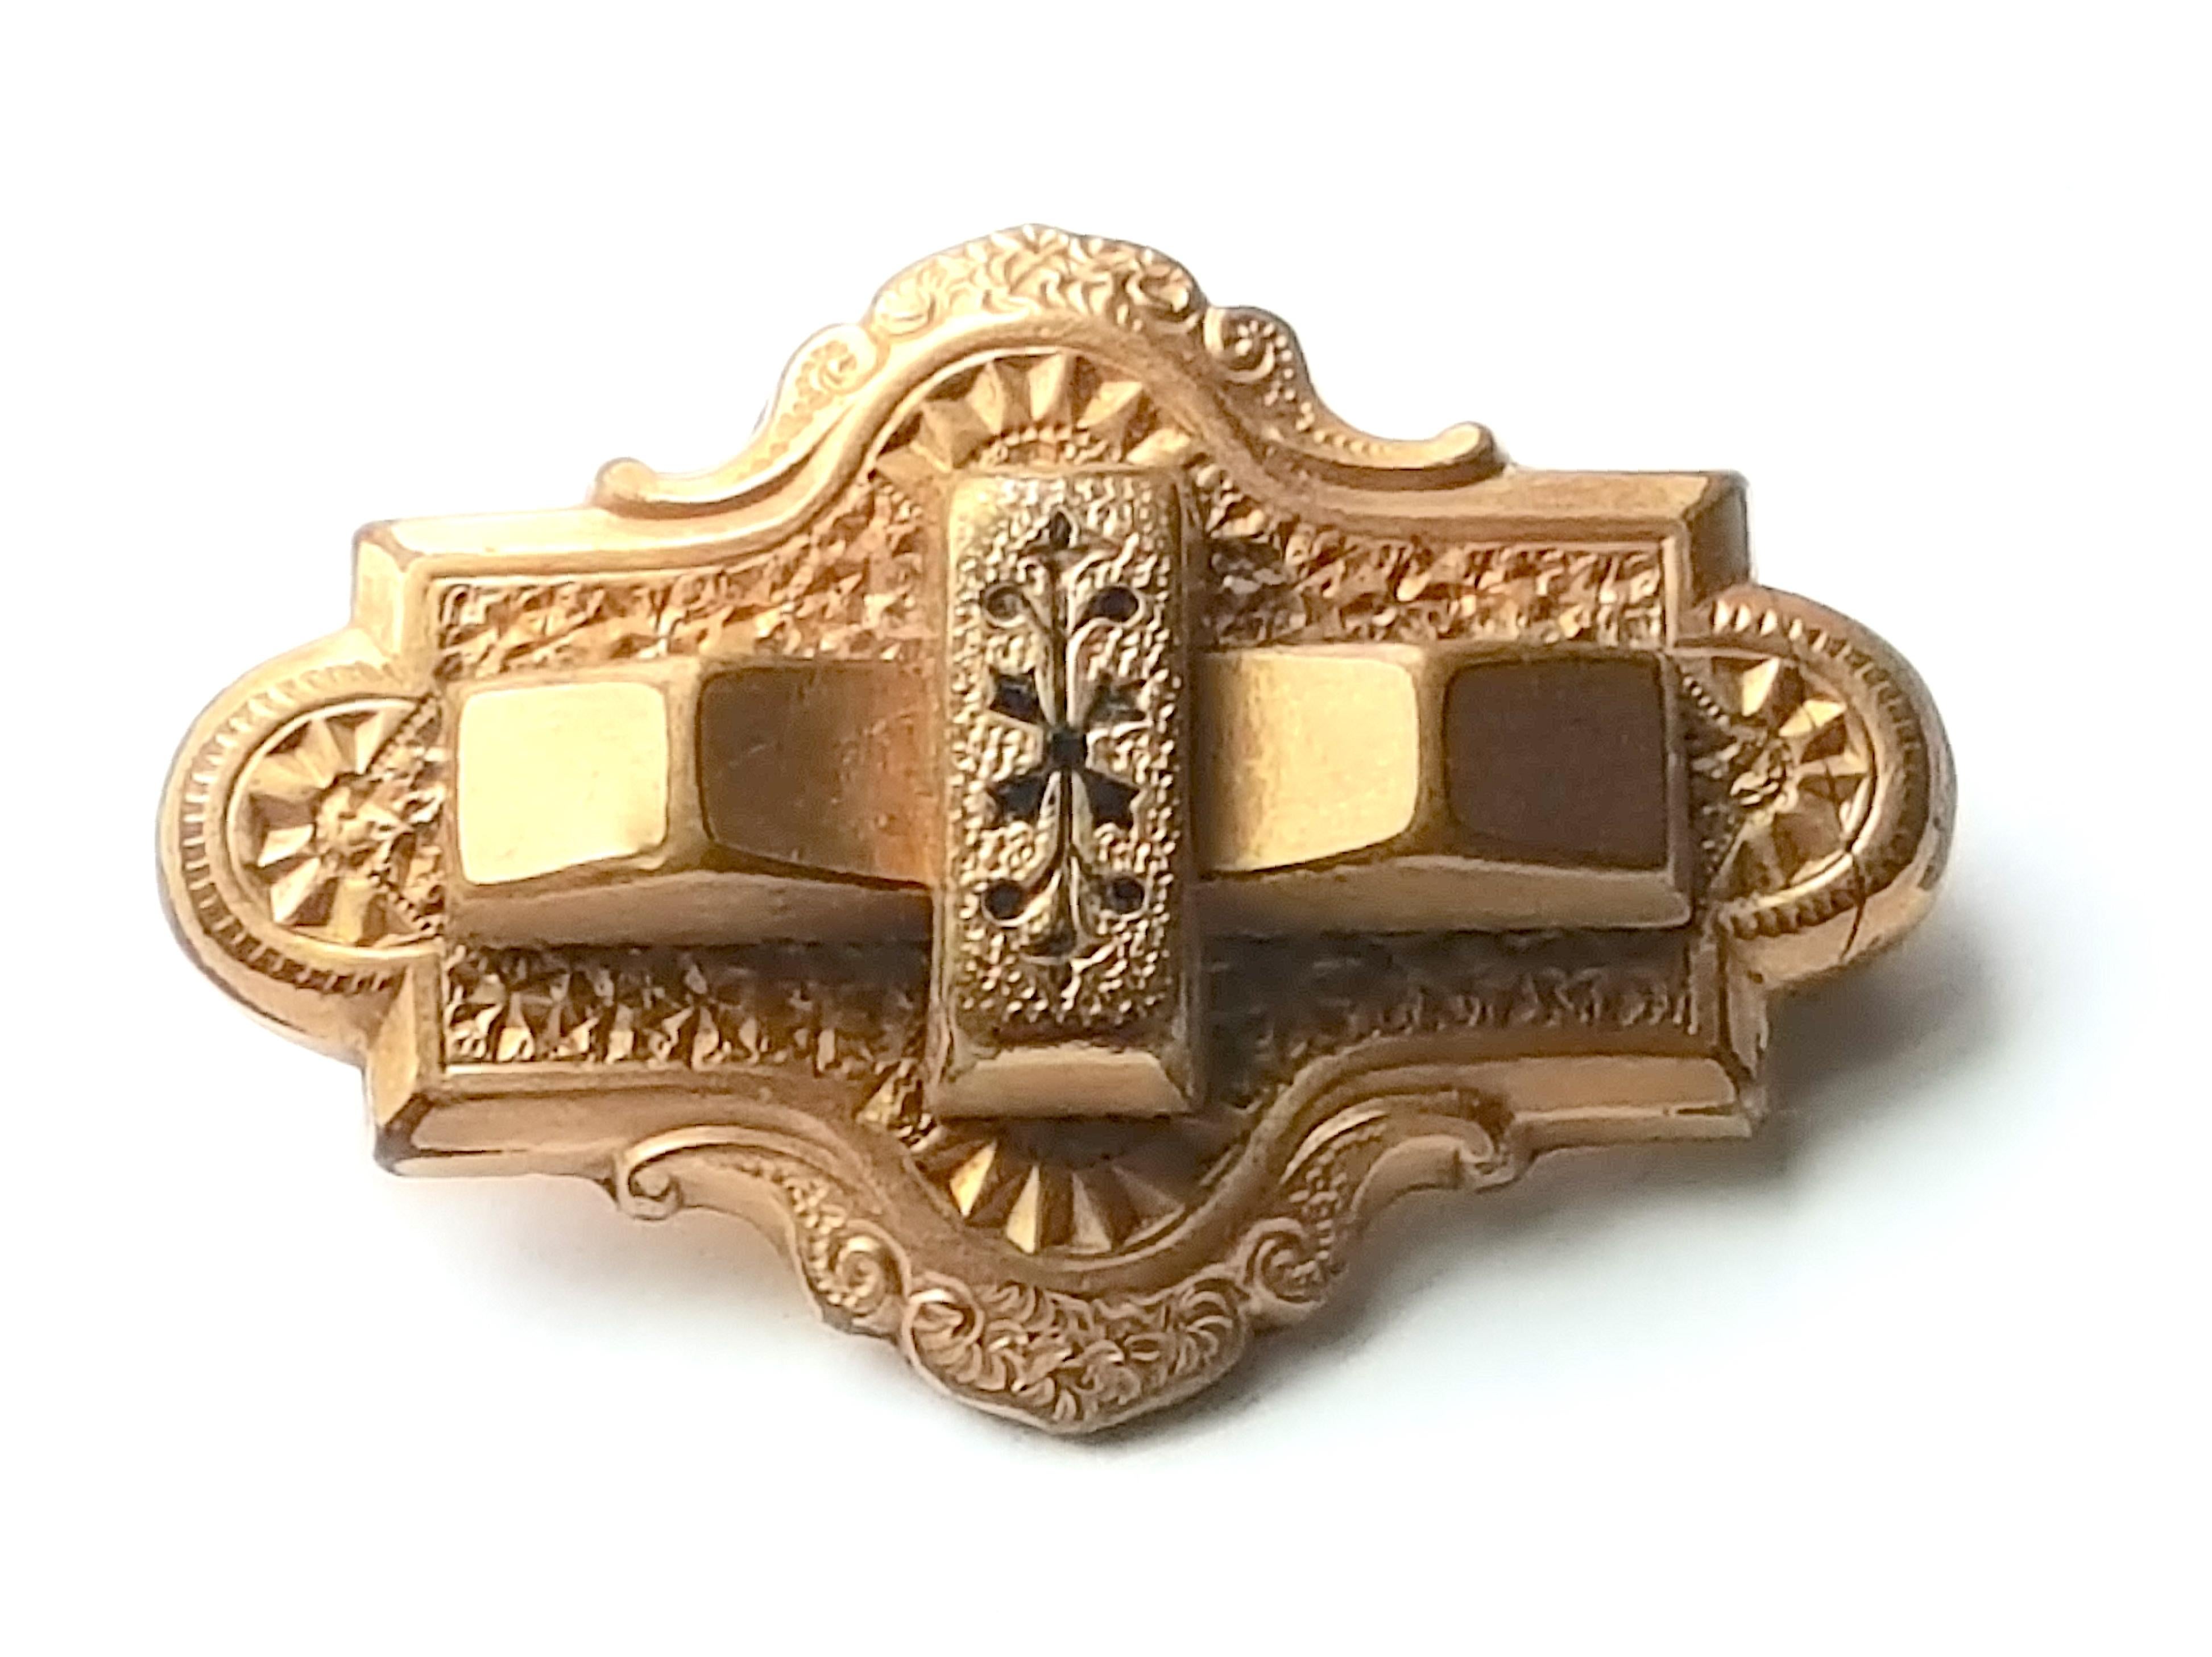 Cruciform NielloInlay FleurDeLys GiltEngravedCopperAlloy Heraldry Brooch Pendant In Good Condition For Sale In Chicago, IL